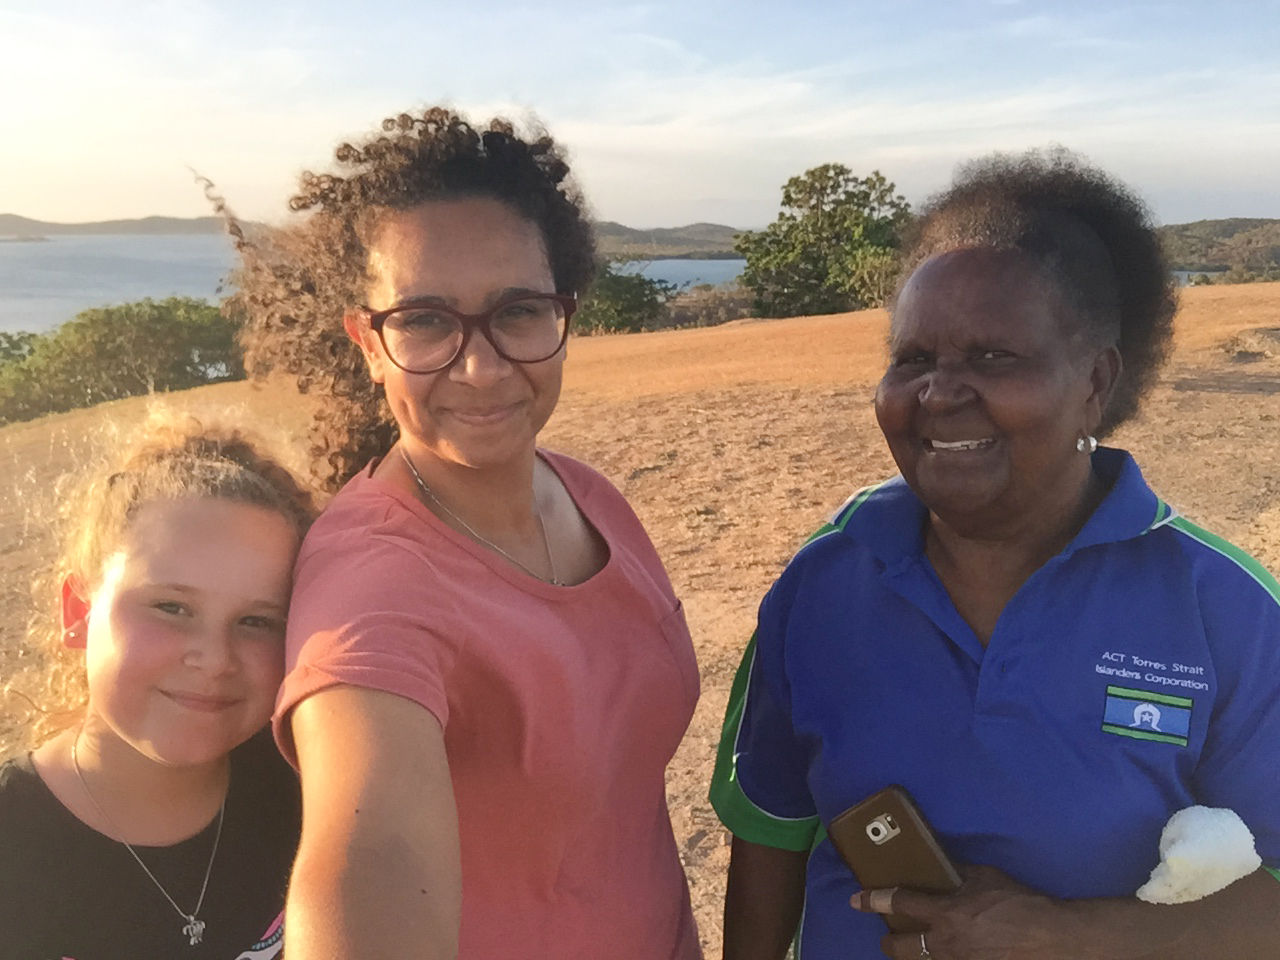 Torres Strait Islander woman with young child and older woman